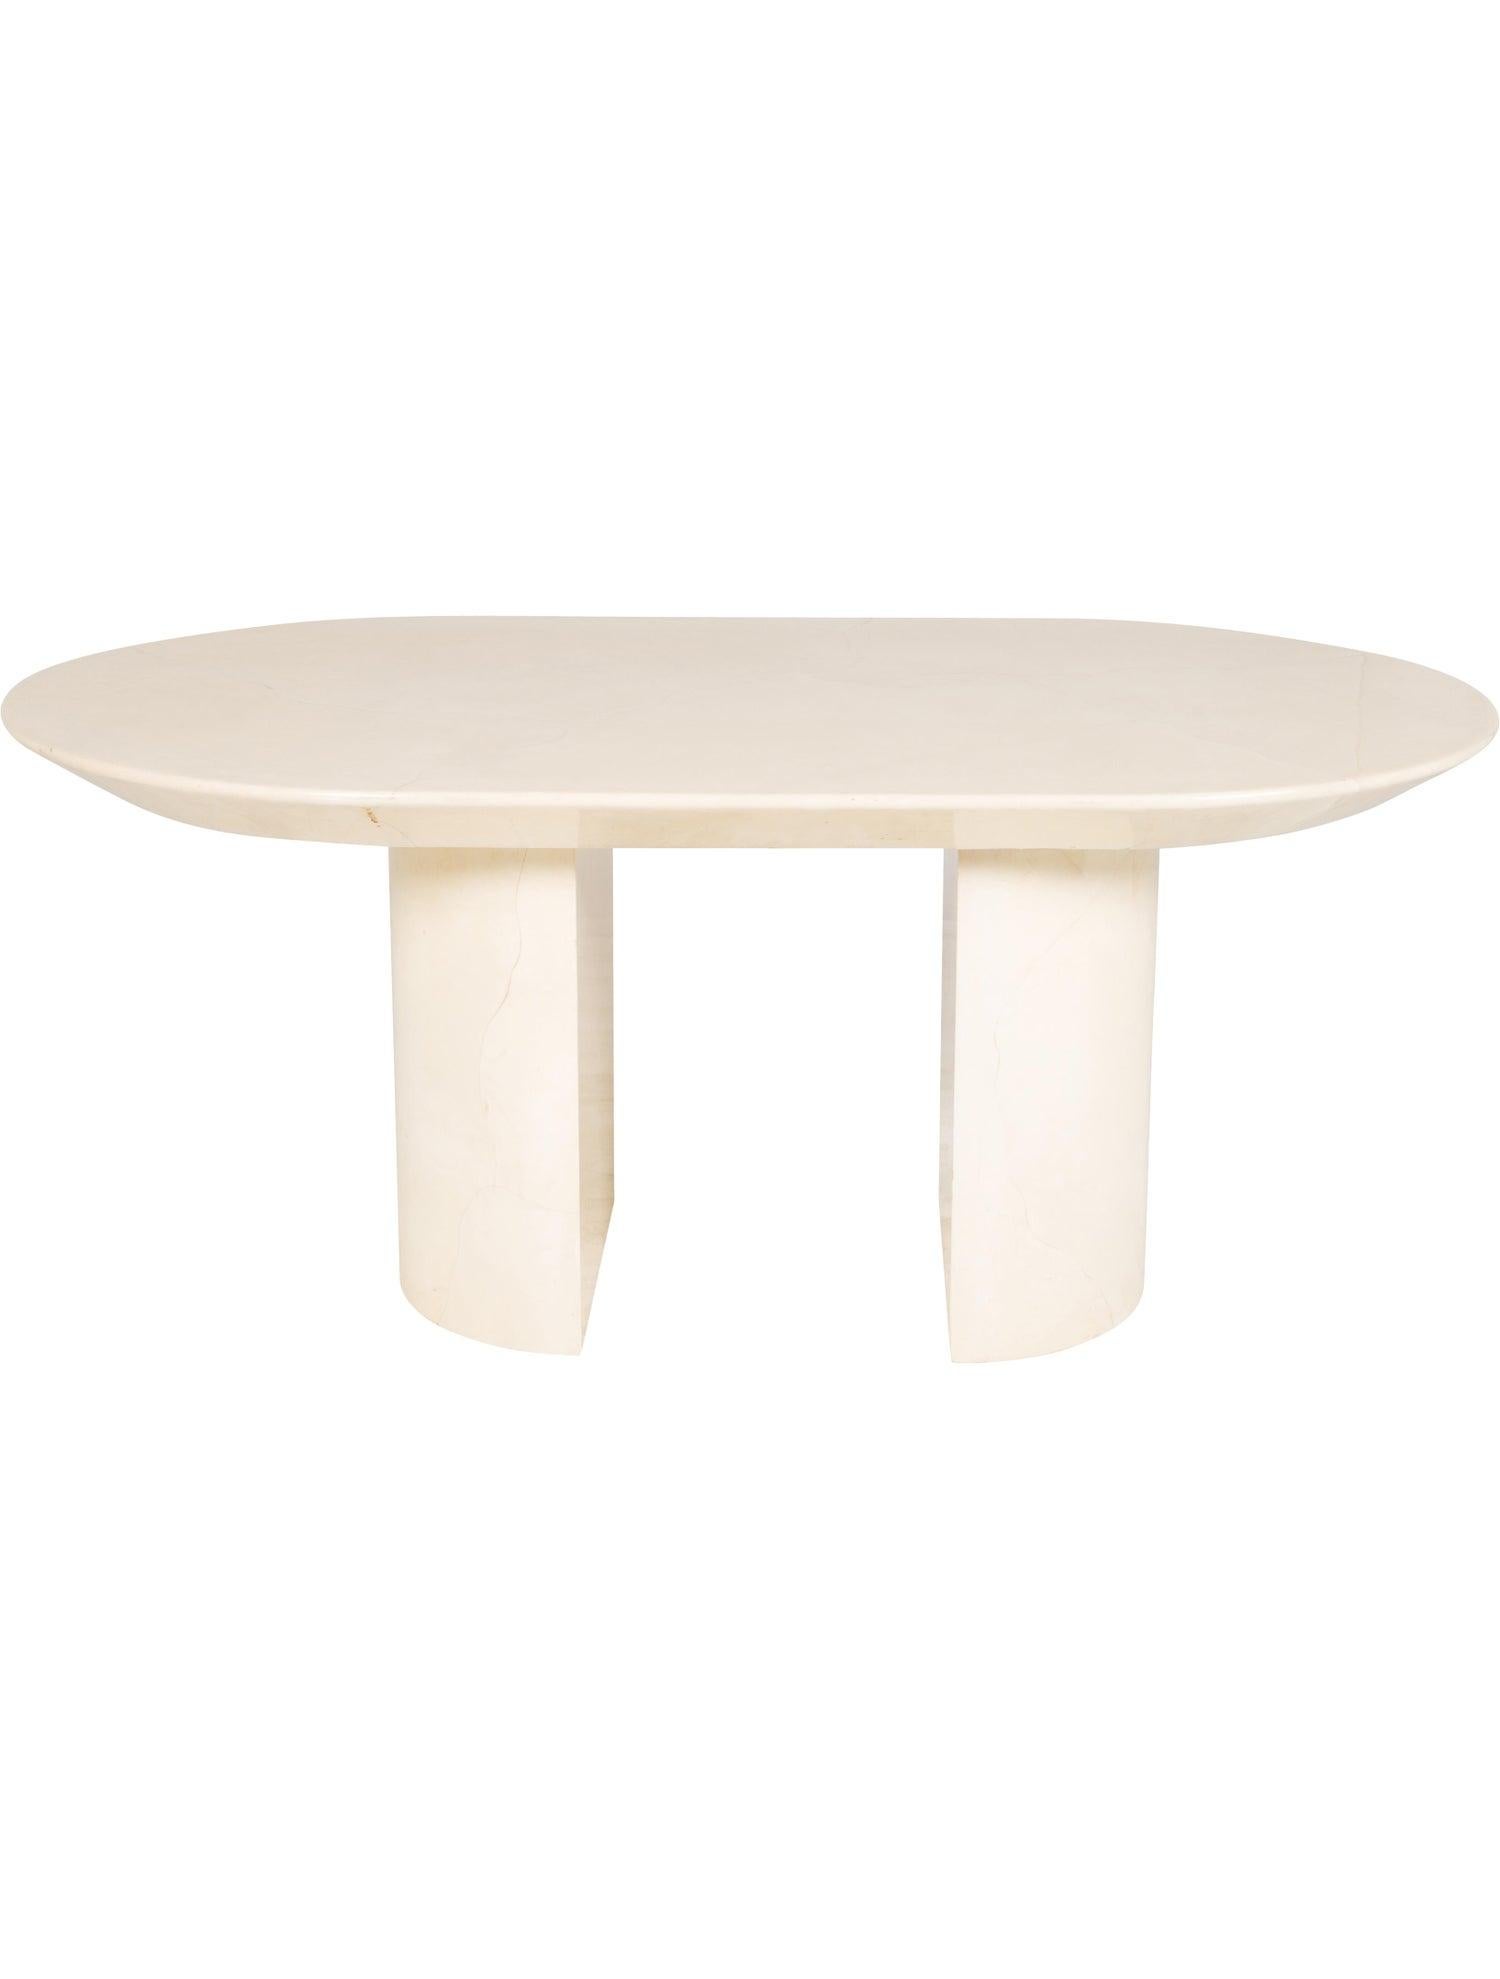 oval lacquer dining table